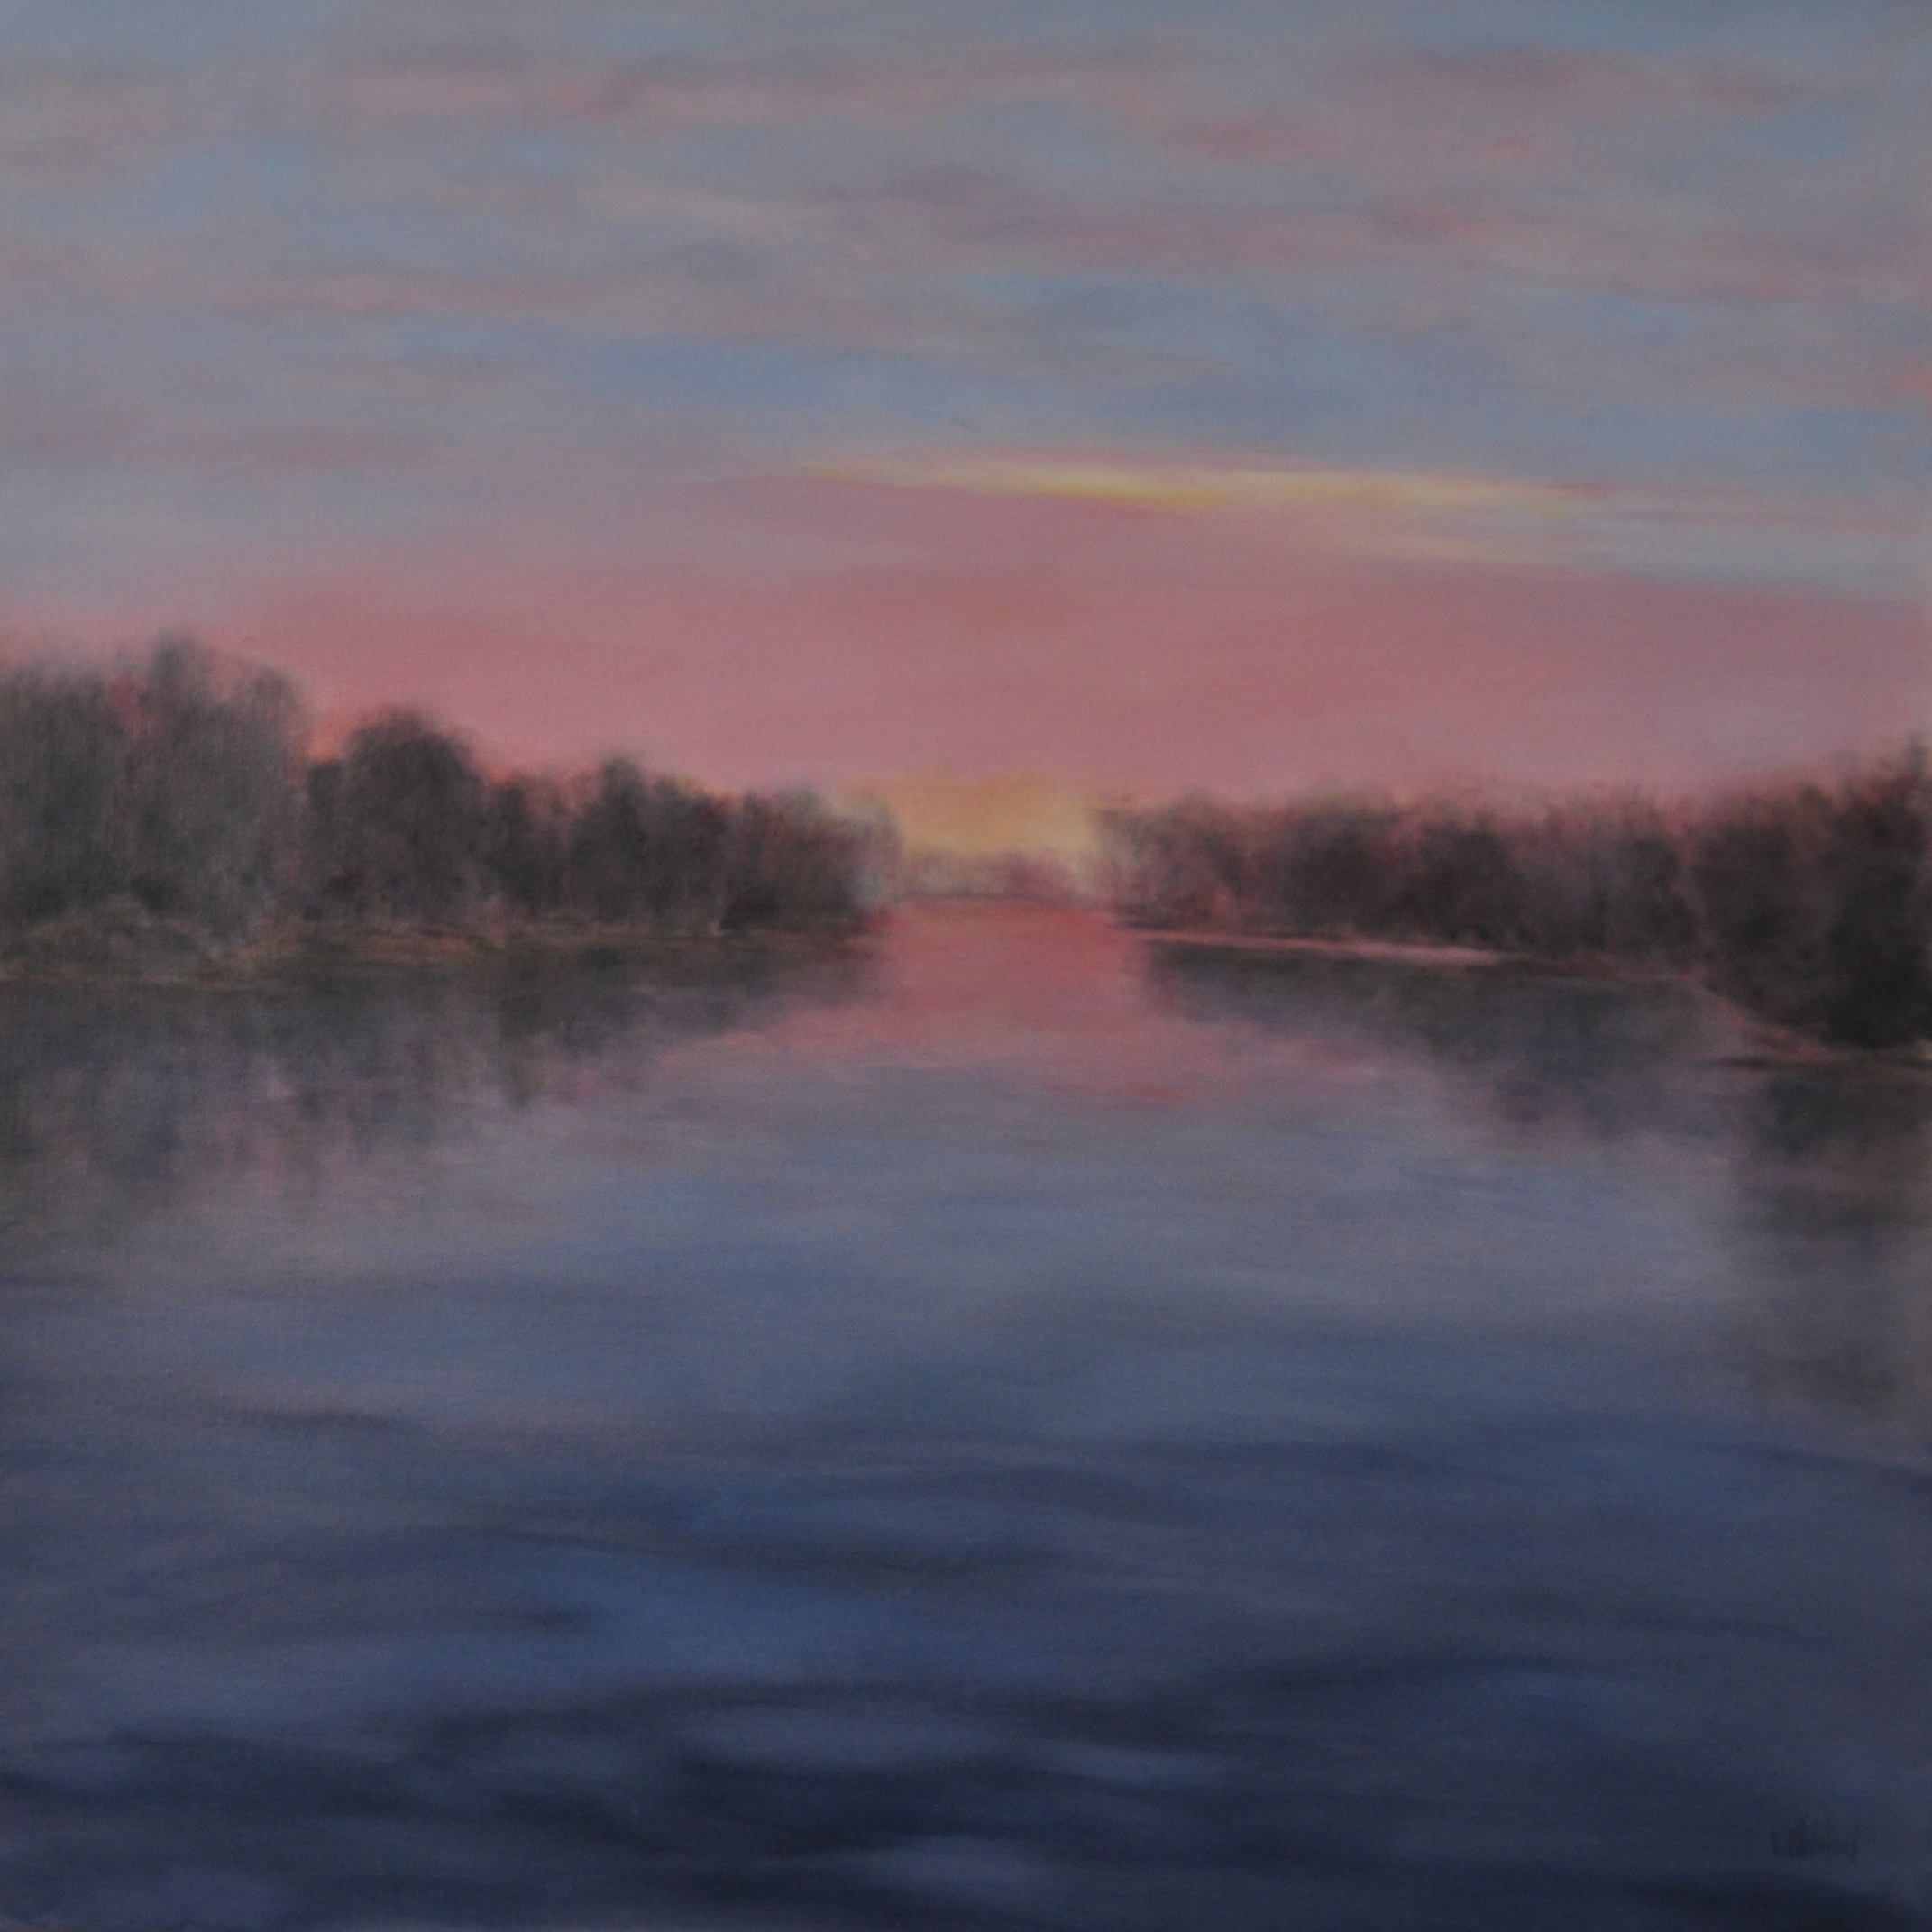 Evening's Invitation, Oil on Linen, 30 x 30, private collection